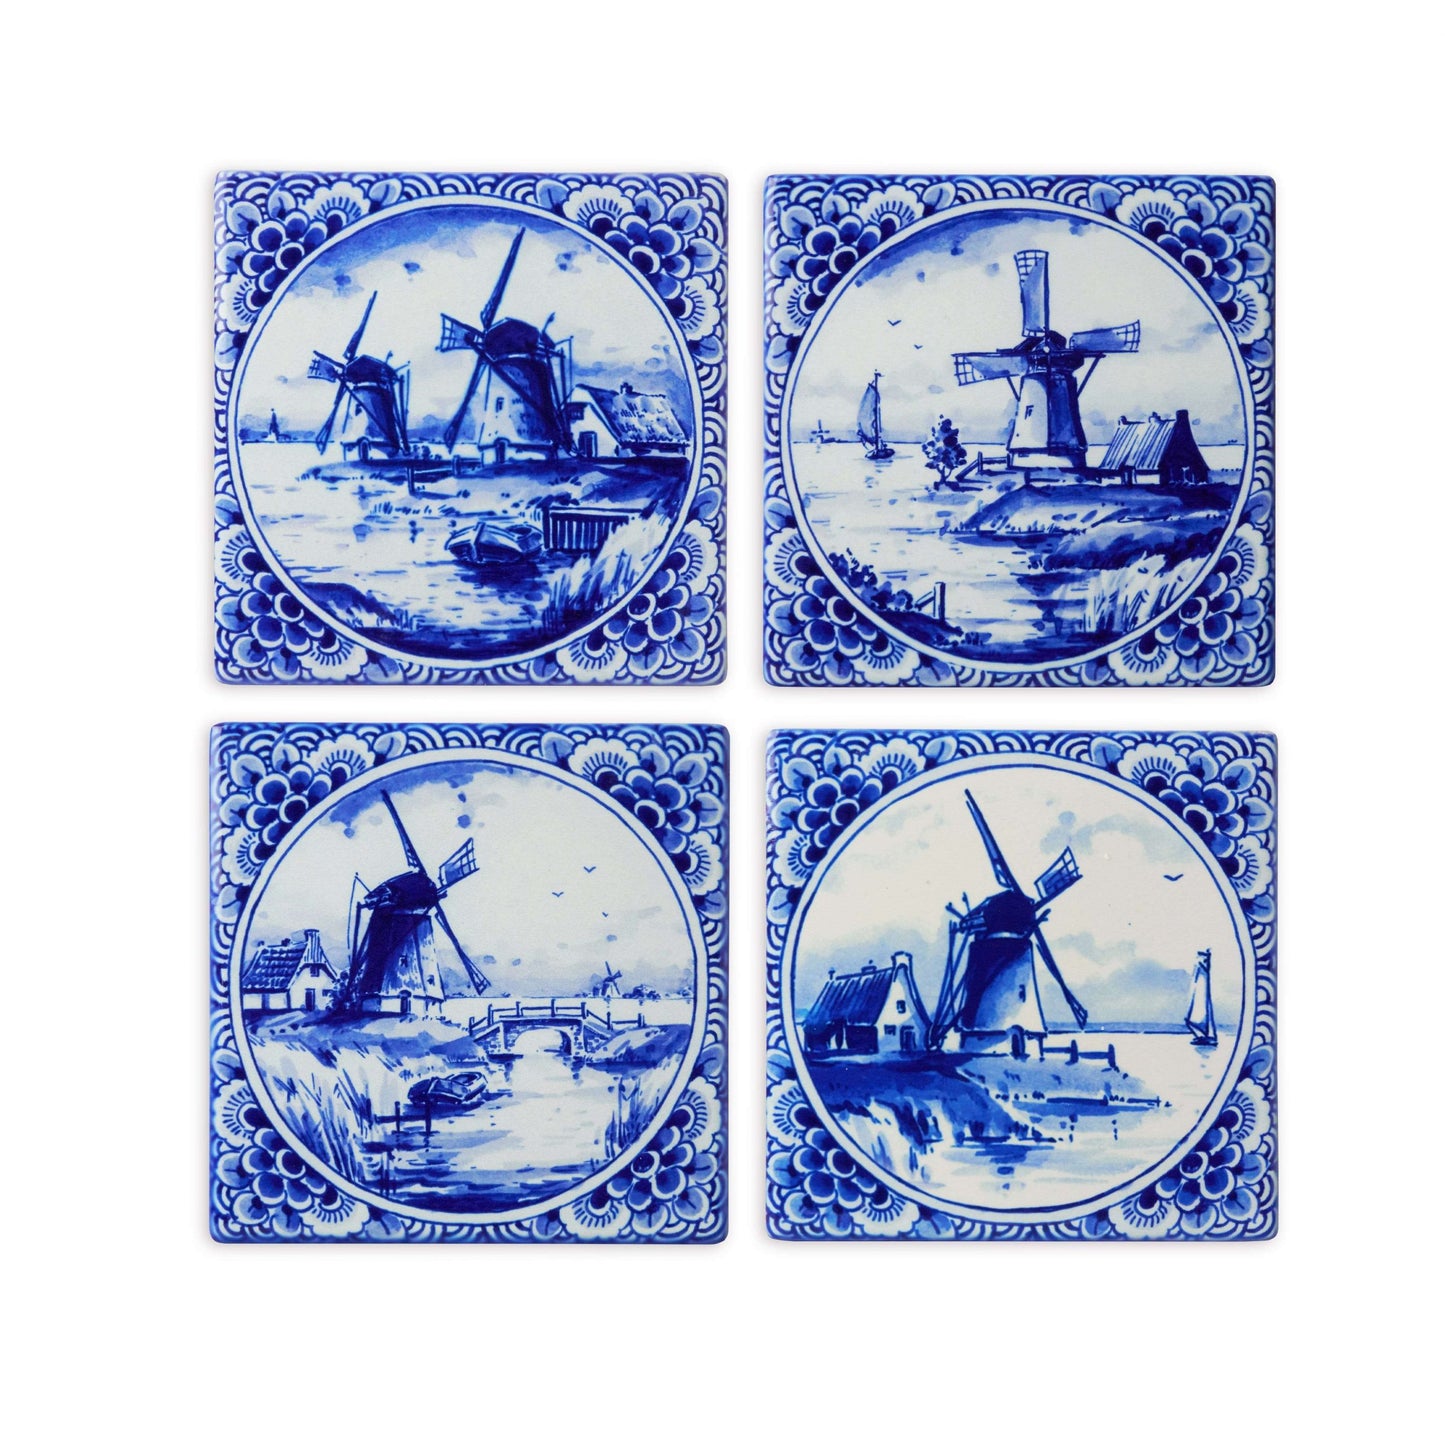 Delft Blue Ceramic Coasters with 4 Images of Windmills